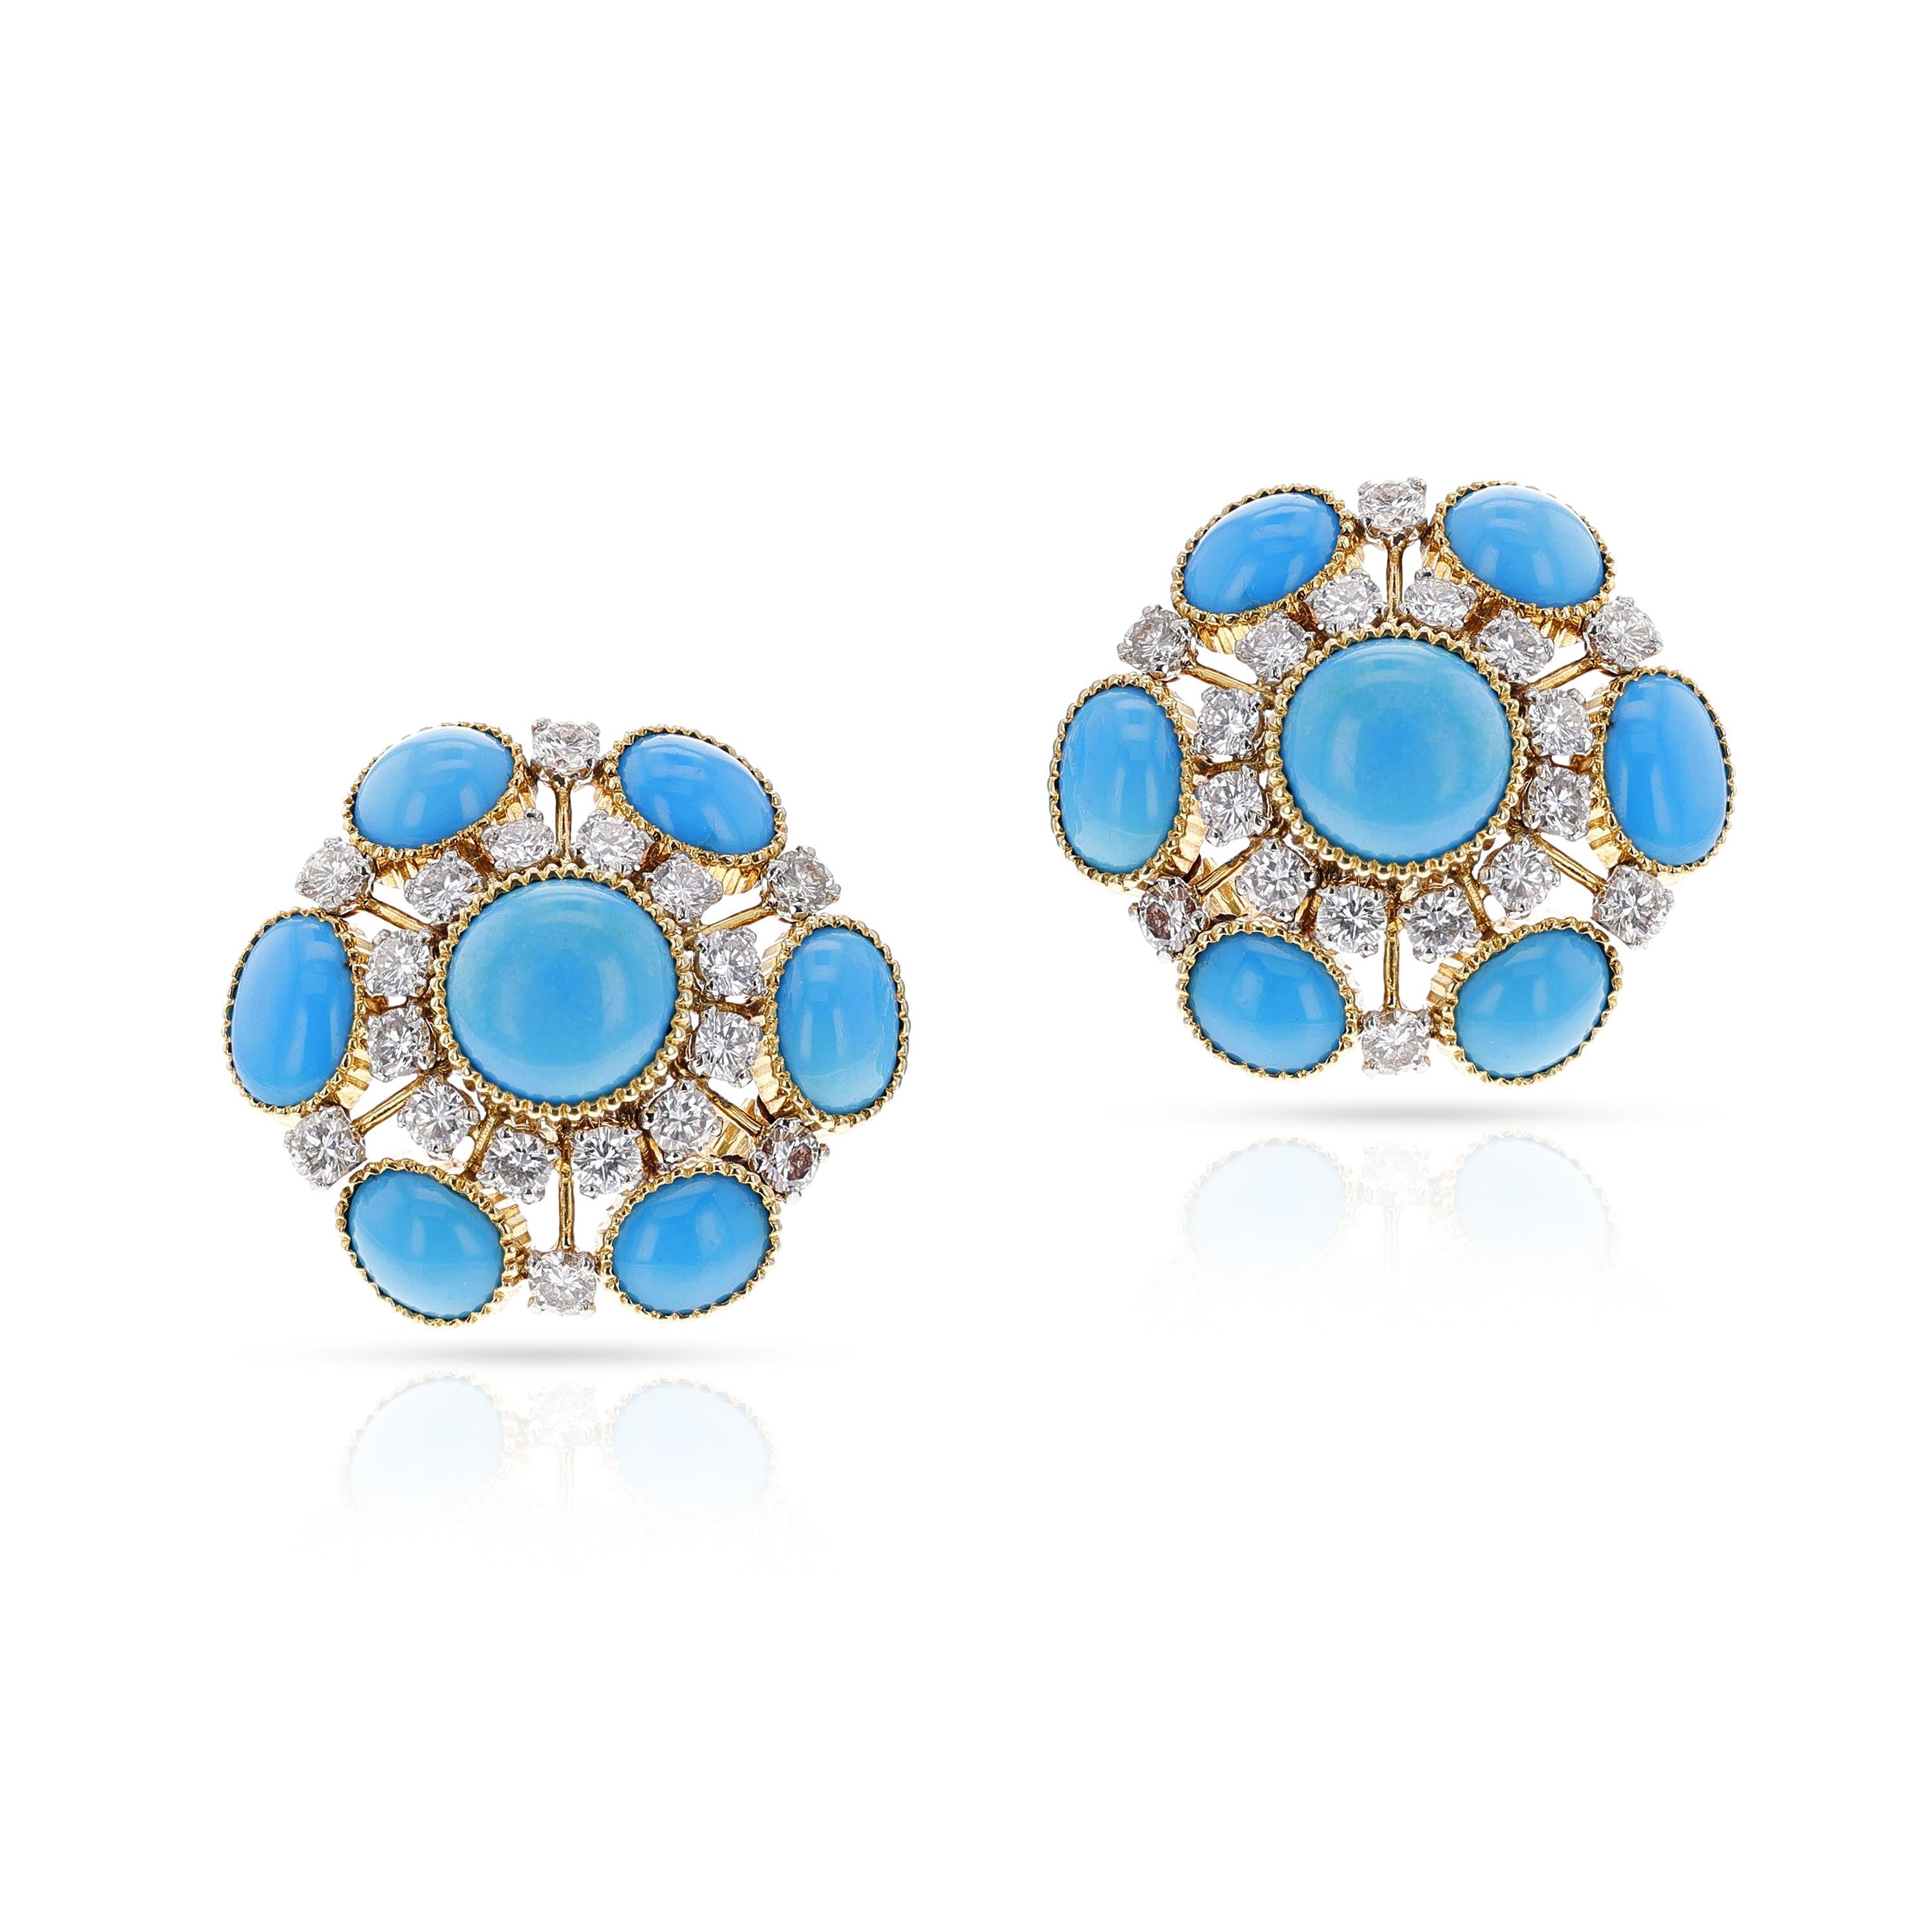 Cartier Turquoise Cabochon and Diamond Earrings In Excellent Condition For Sale In New York, NY